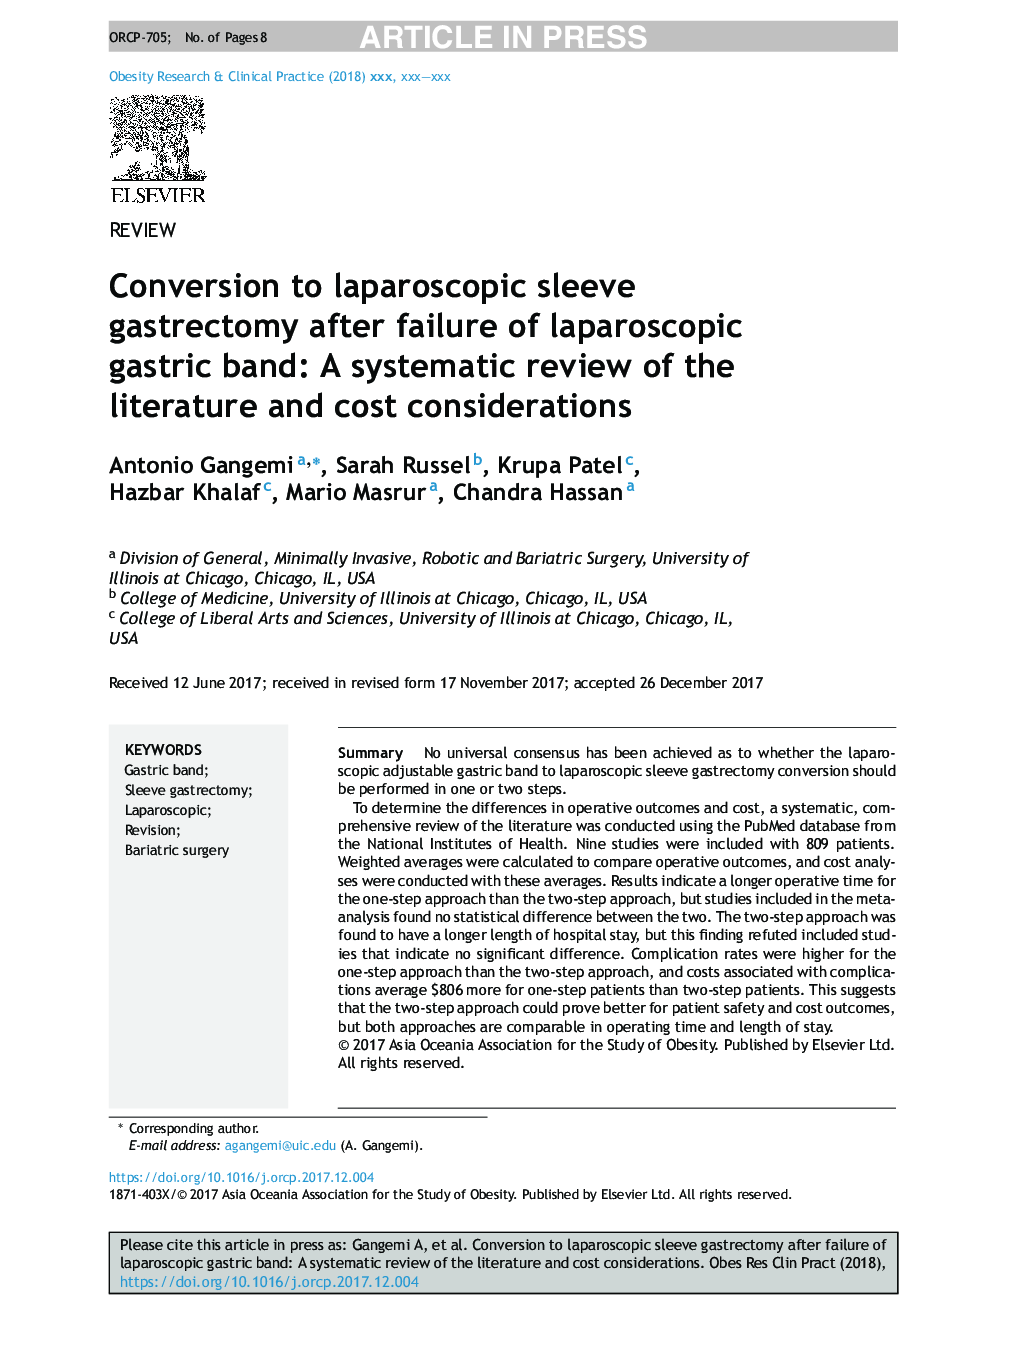 Conversion to laparoscopic sleeve gastrectomy after failure of laparoscopic gastric band: A systematic review of the literature and cost considerations